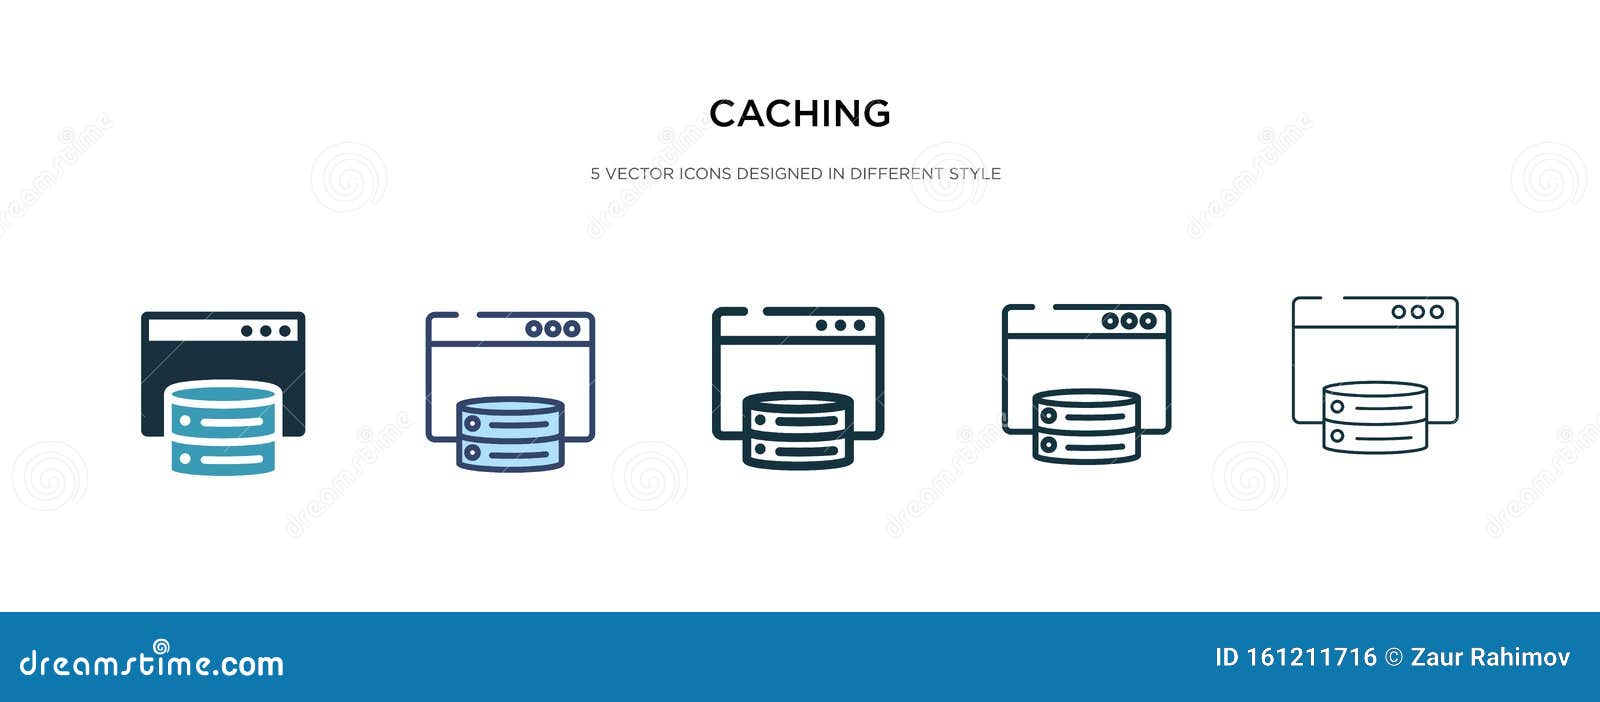 Caching Icon In Different Style Vector Illustration Two Colored And